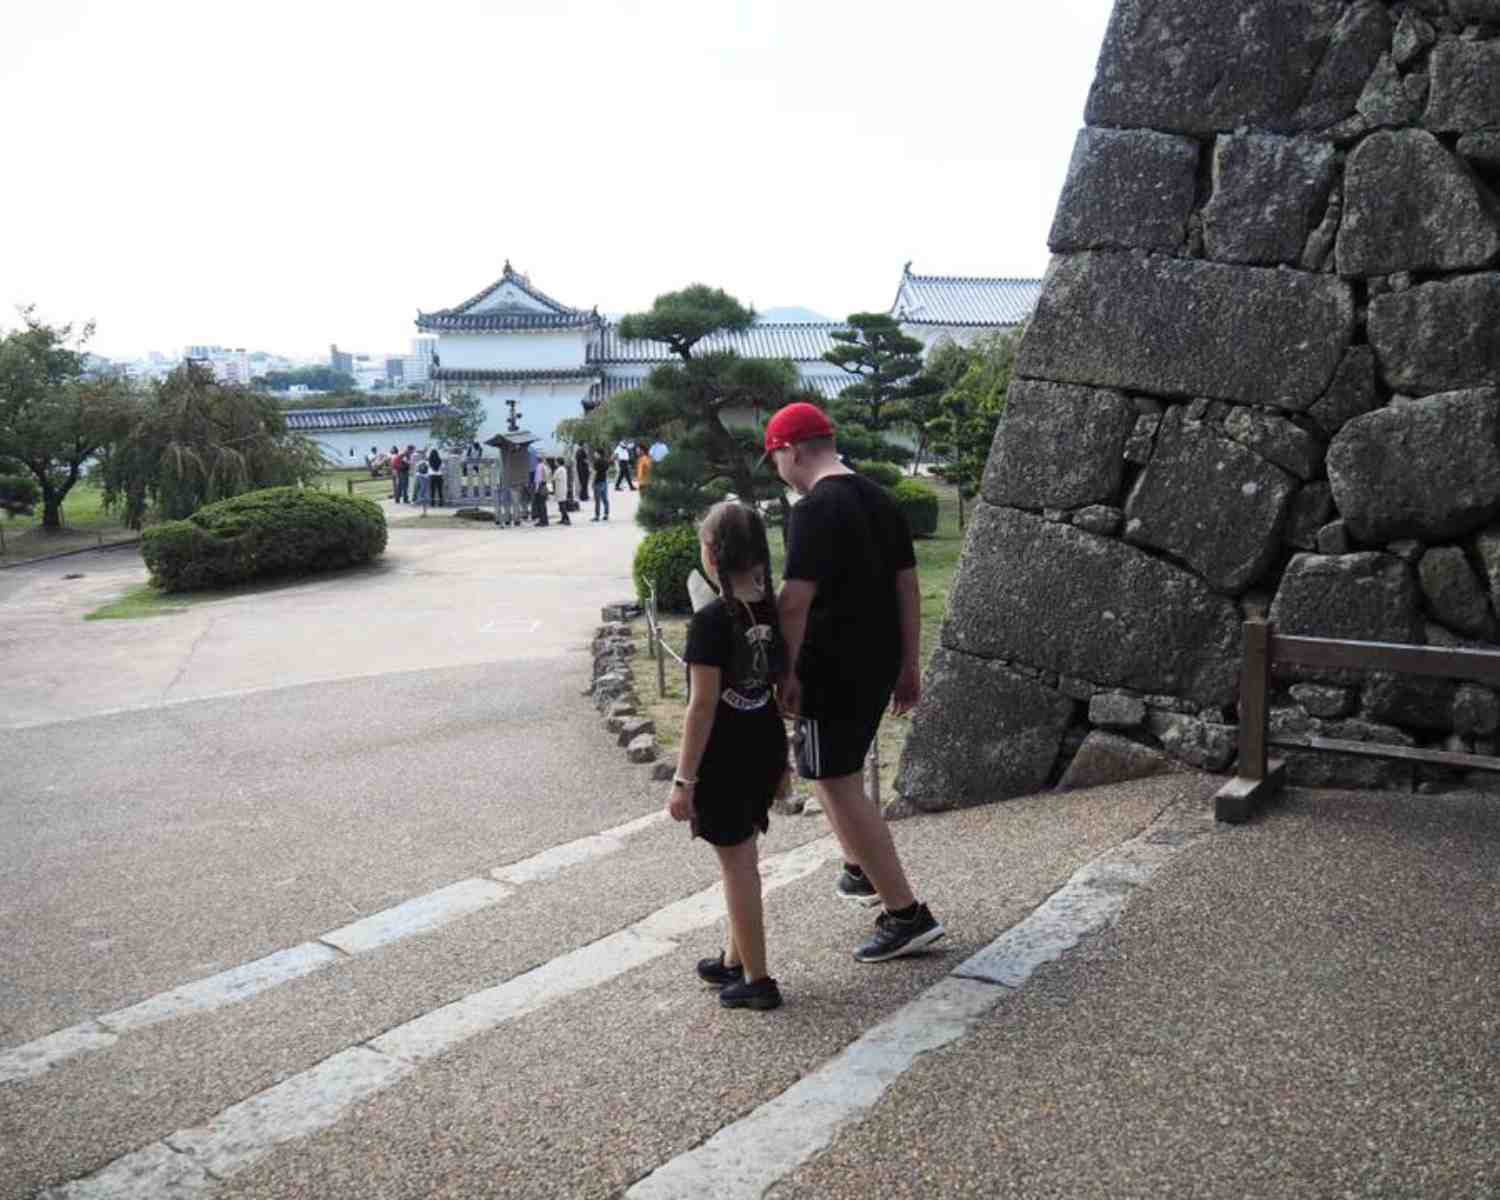 The pathways to Himeji Castle in Japan